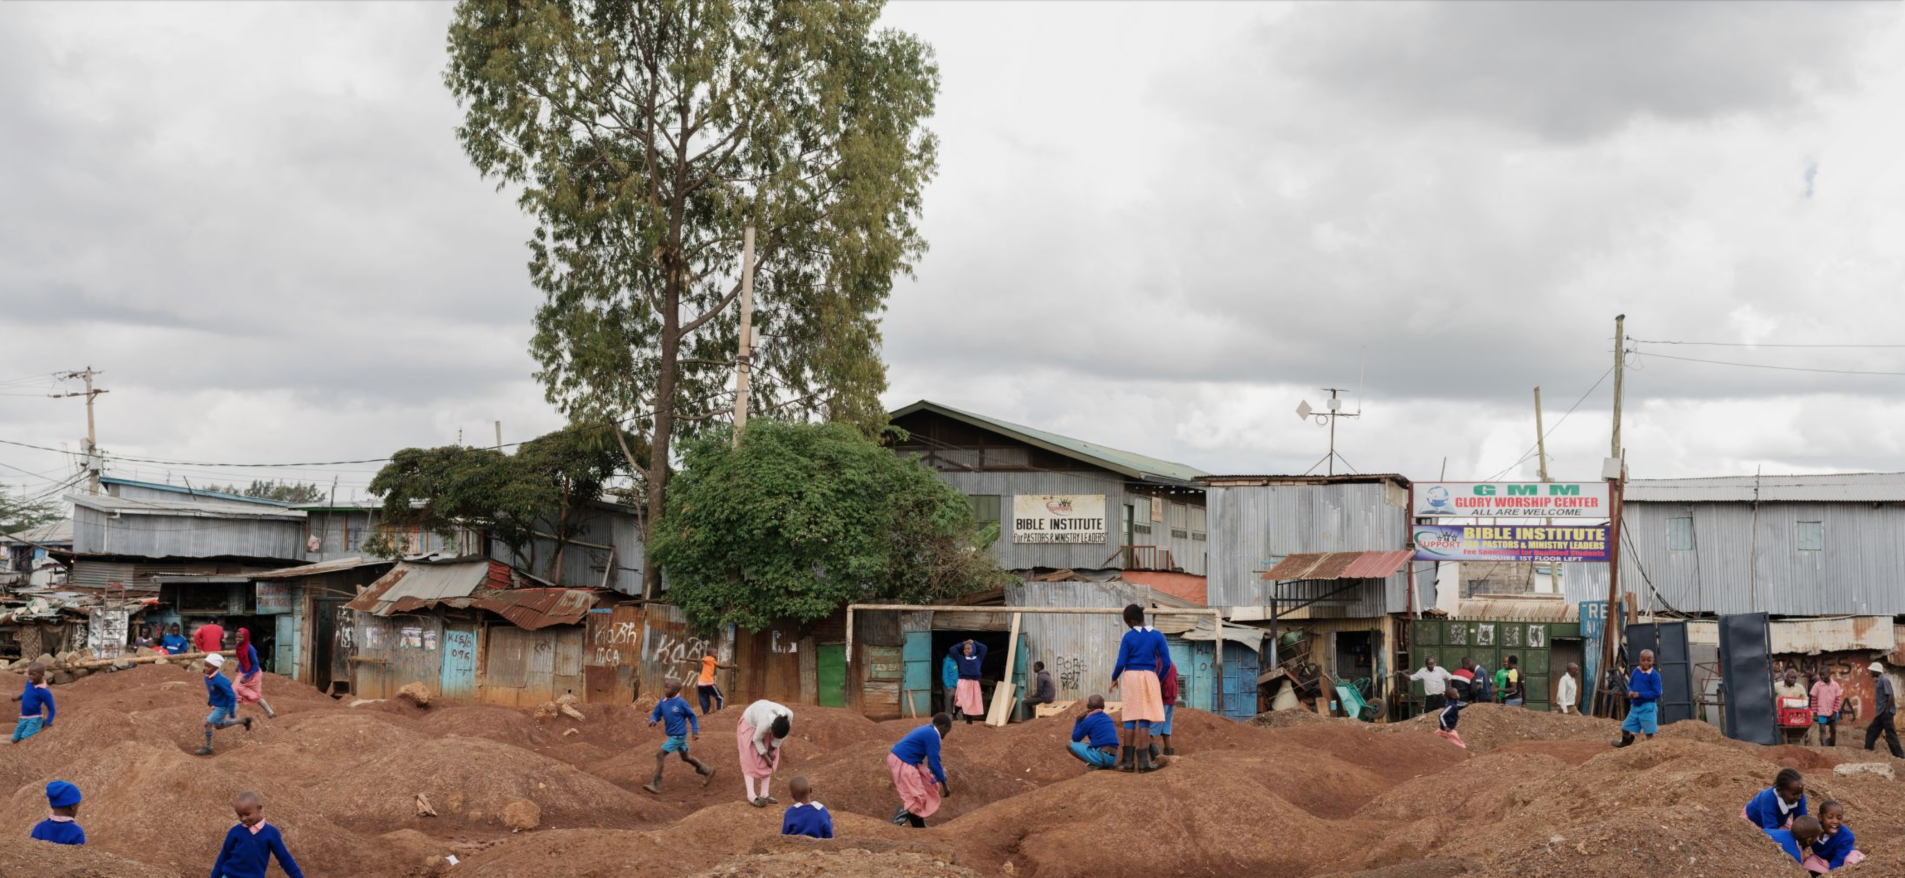 Children play on the Laini Saba football field in Kibera, Nairobi. The field, in a state of incomplete renovation, was reported to the What Went Wrong? survey by Morris Mwendo Mulwa, a local man who plays on a local soccer team that used to practice on this field. Image by Peter DiCampo. Kenya, 2018.